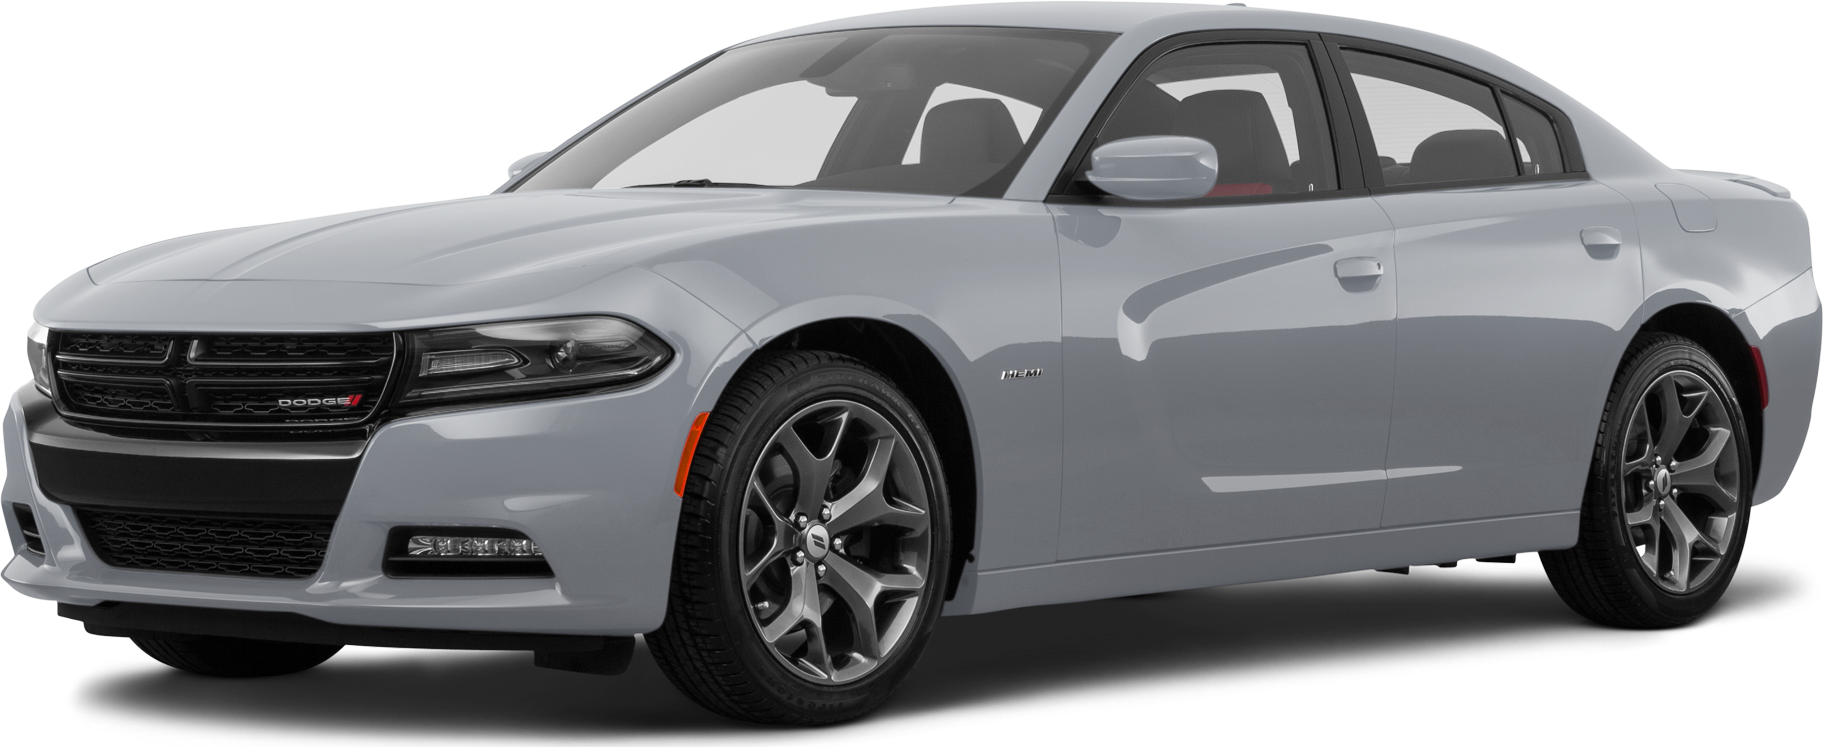 2017 Dodge Charger Values & Cars for Sale | Kelley Blue Book